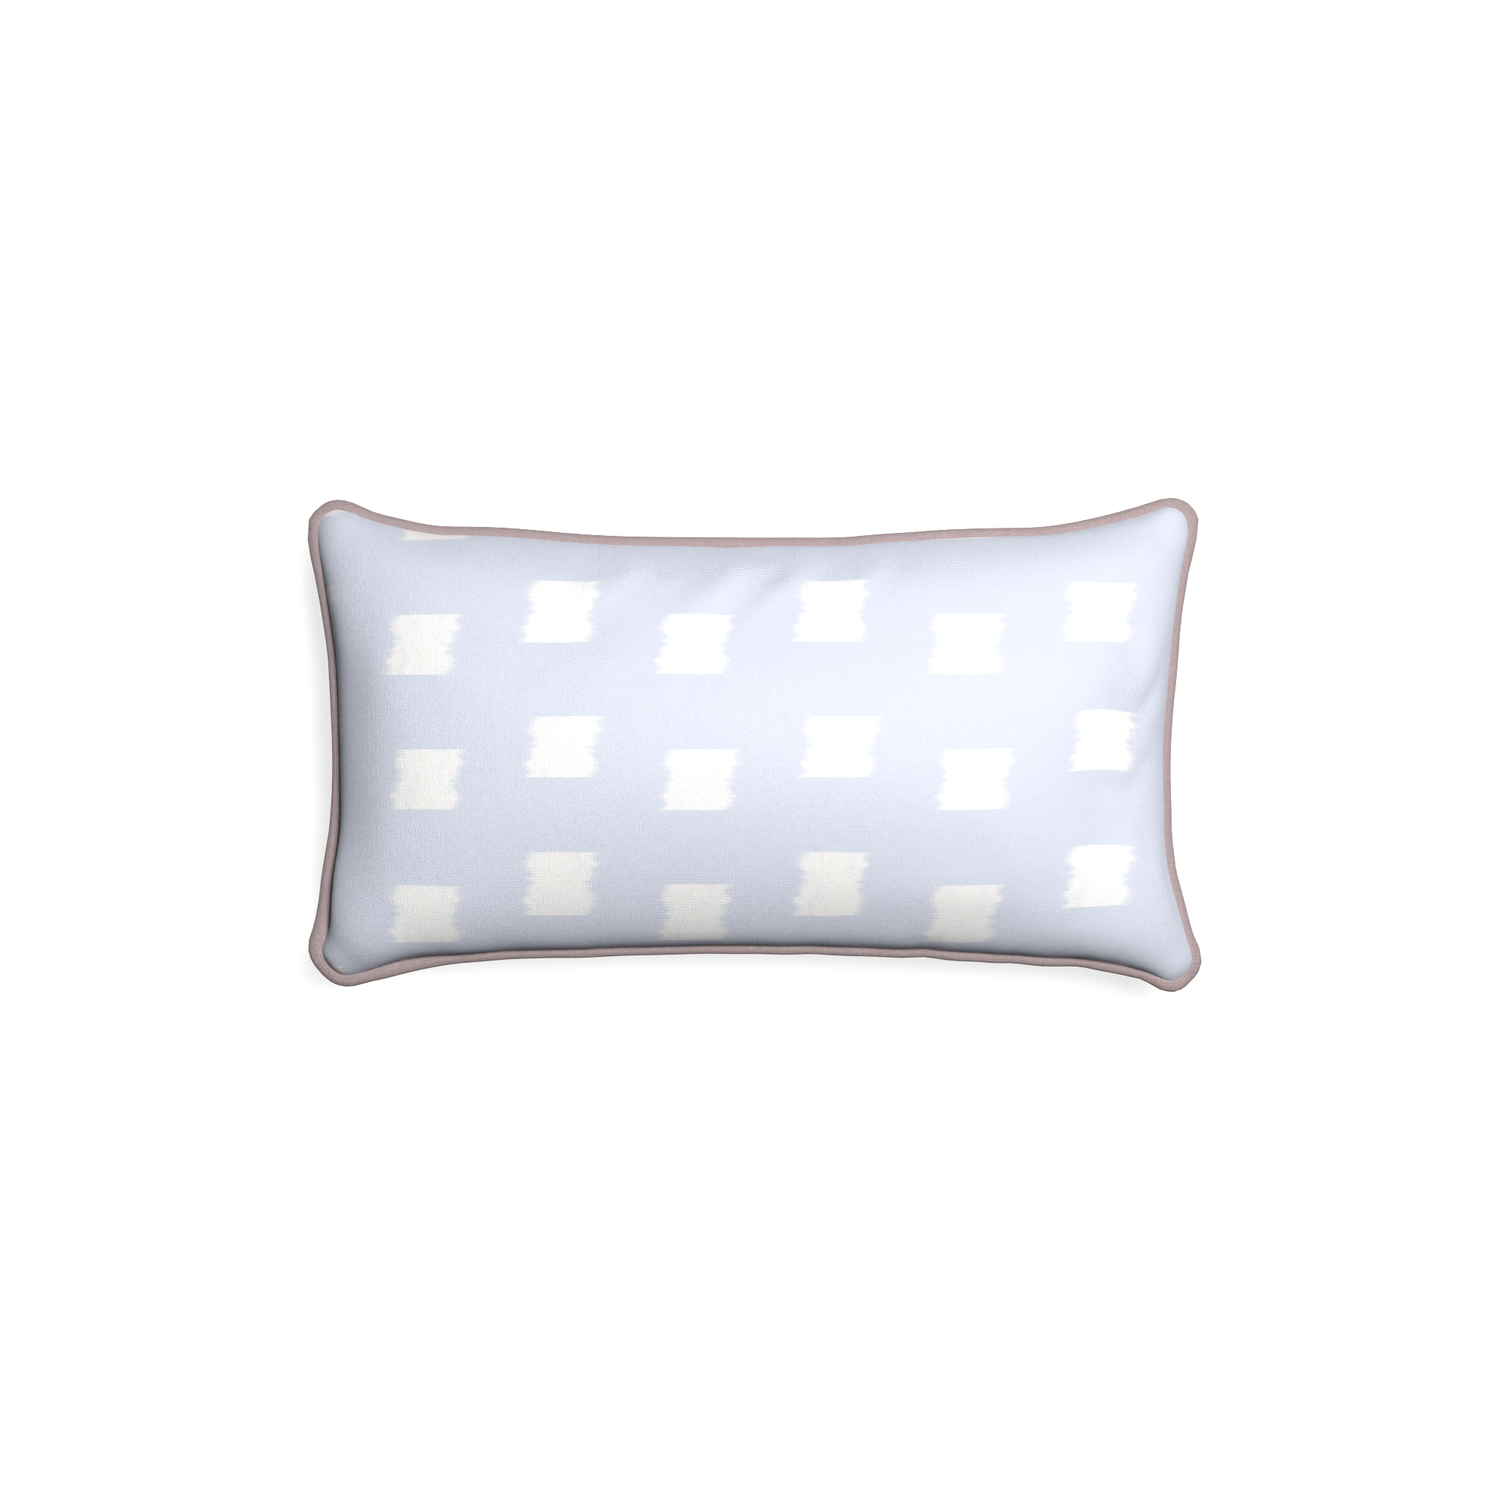 Petite-lumbar denton custom sky blue patternpillow with orchid piping on white background